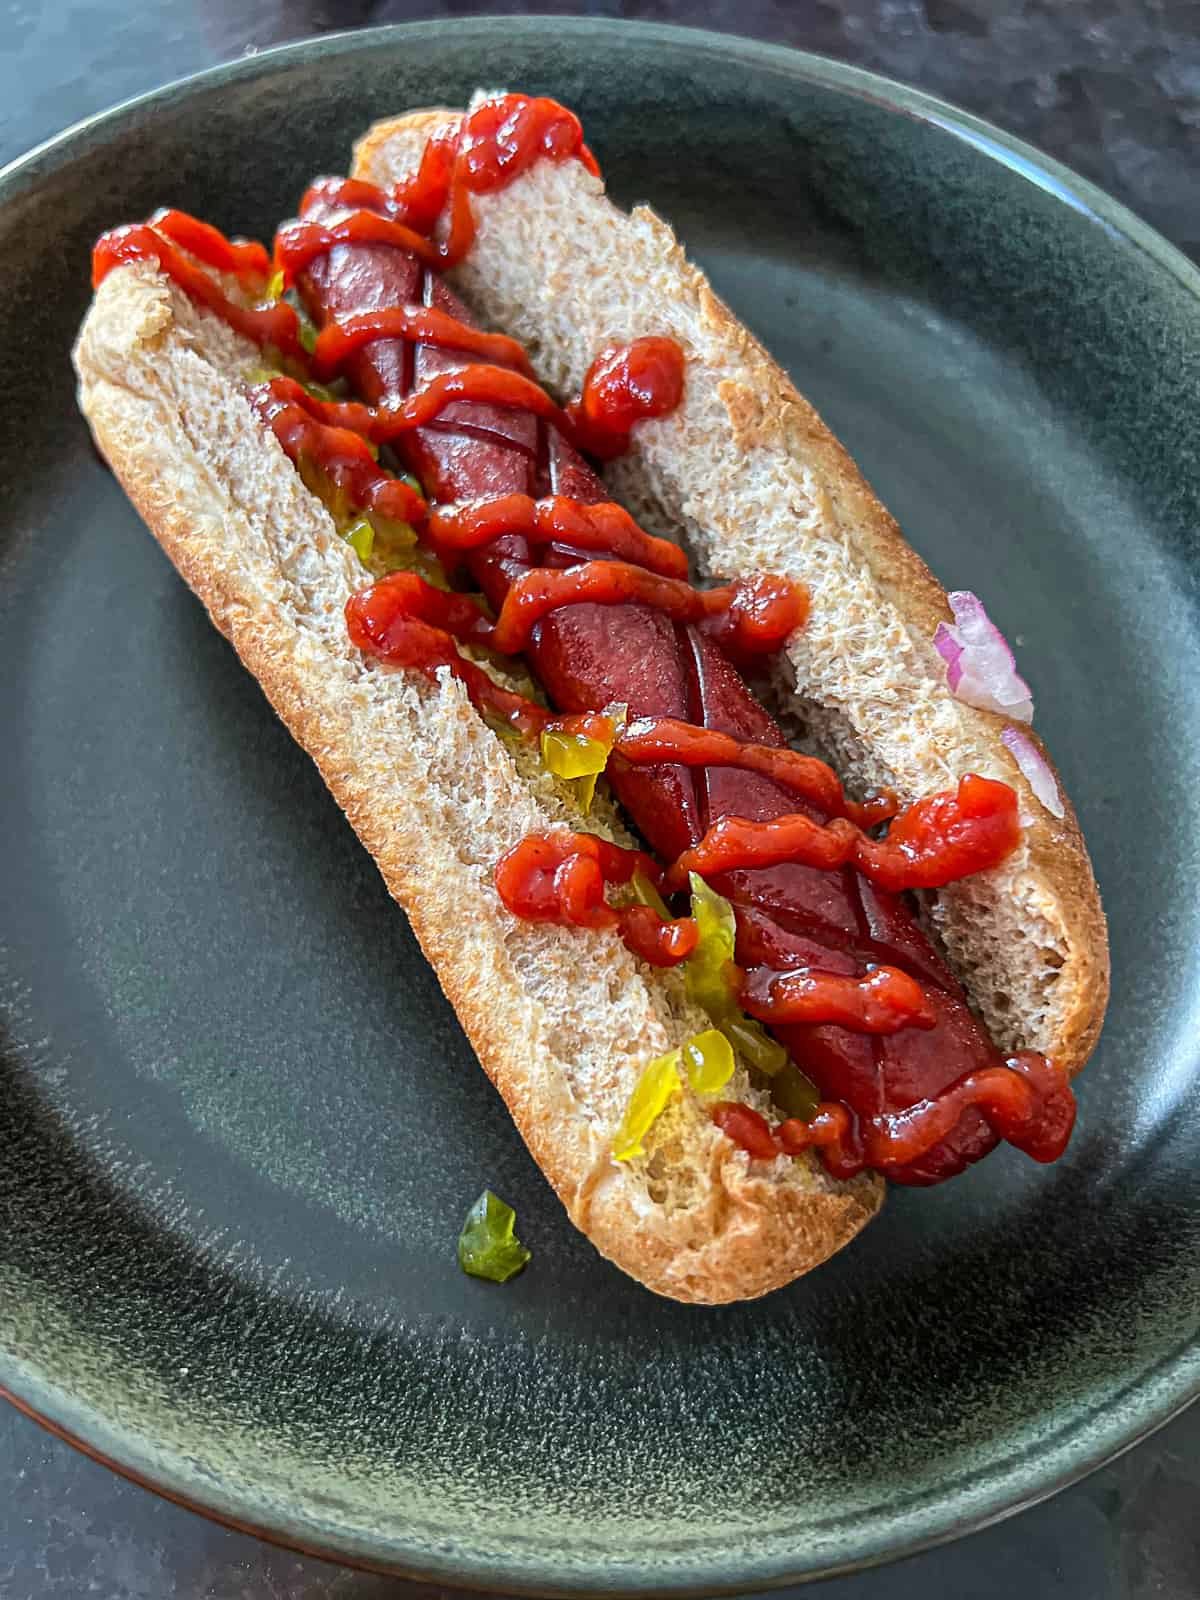 Smoked Traeger Hot Dog in bun with condiments on dinner plate 